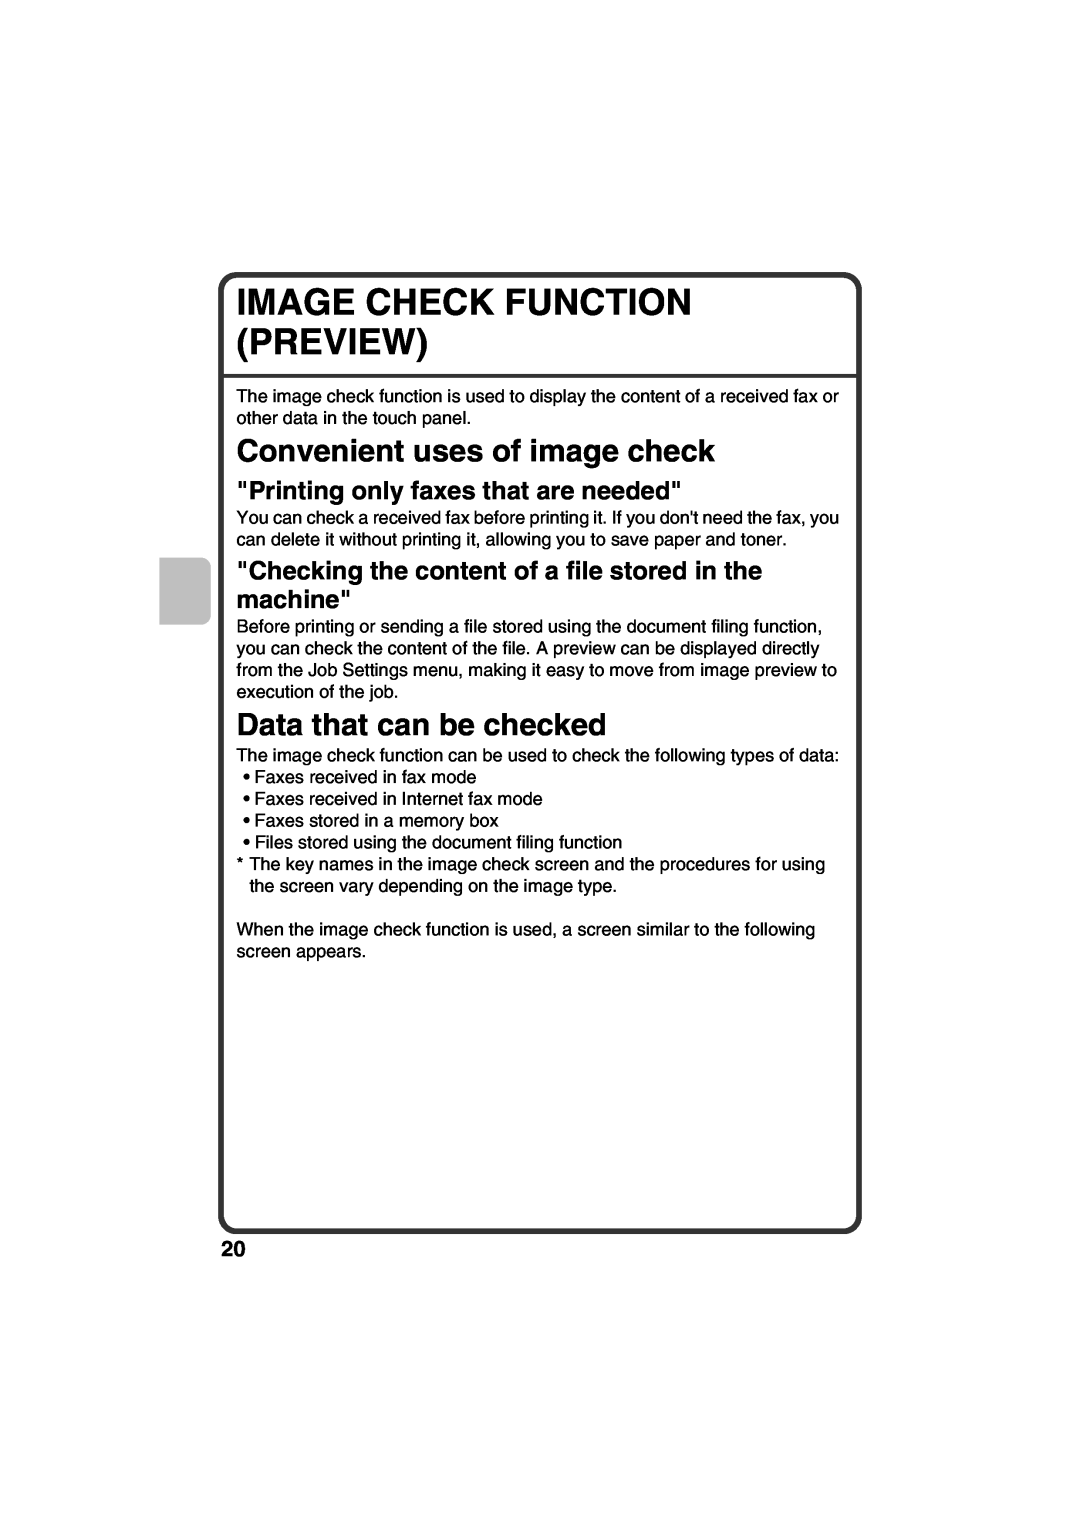 Sharp MX-C311, MX-C381 quick start Image Check Function Preview, Convenient uses of image check, Data that can be checked 